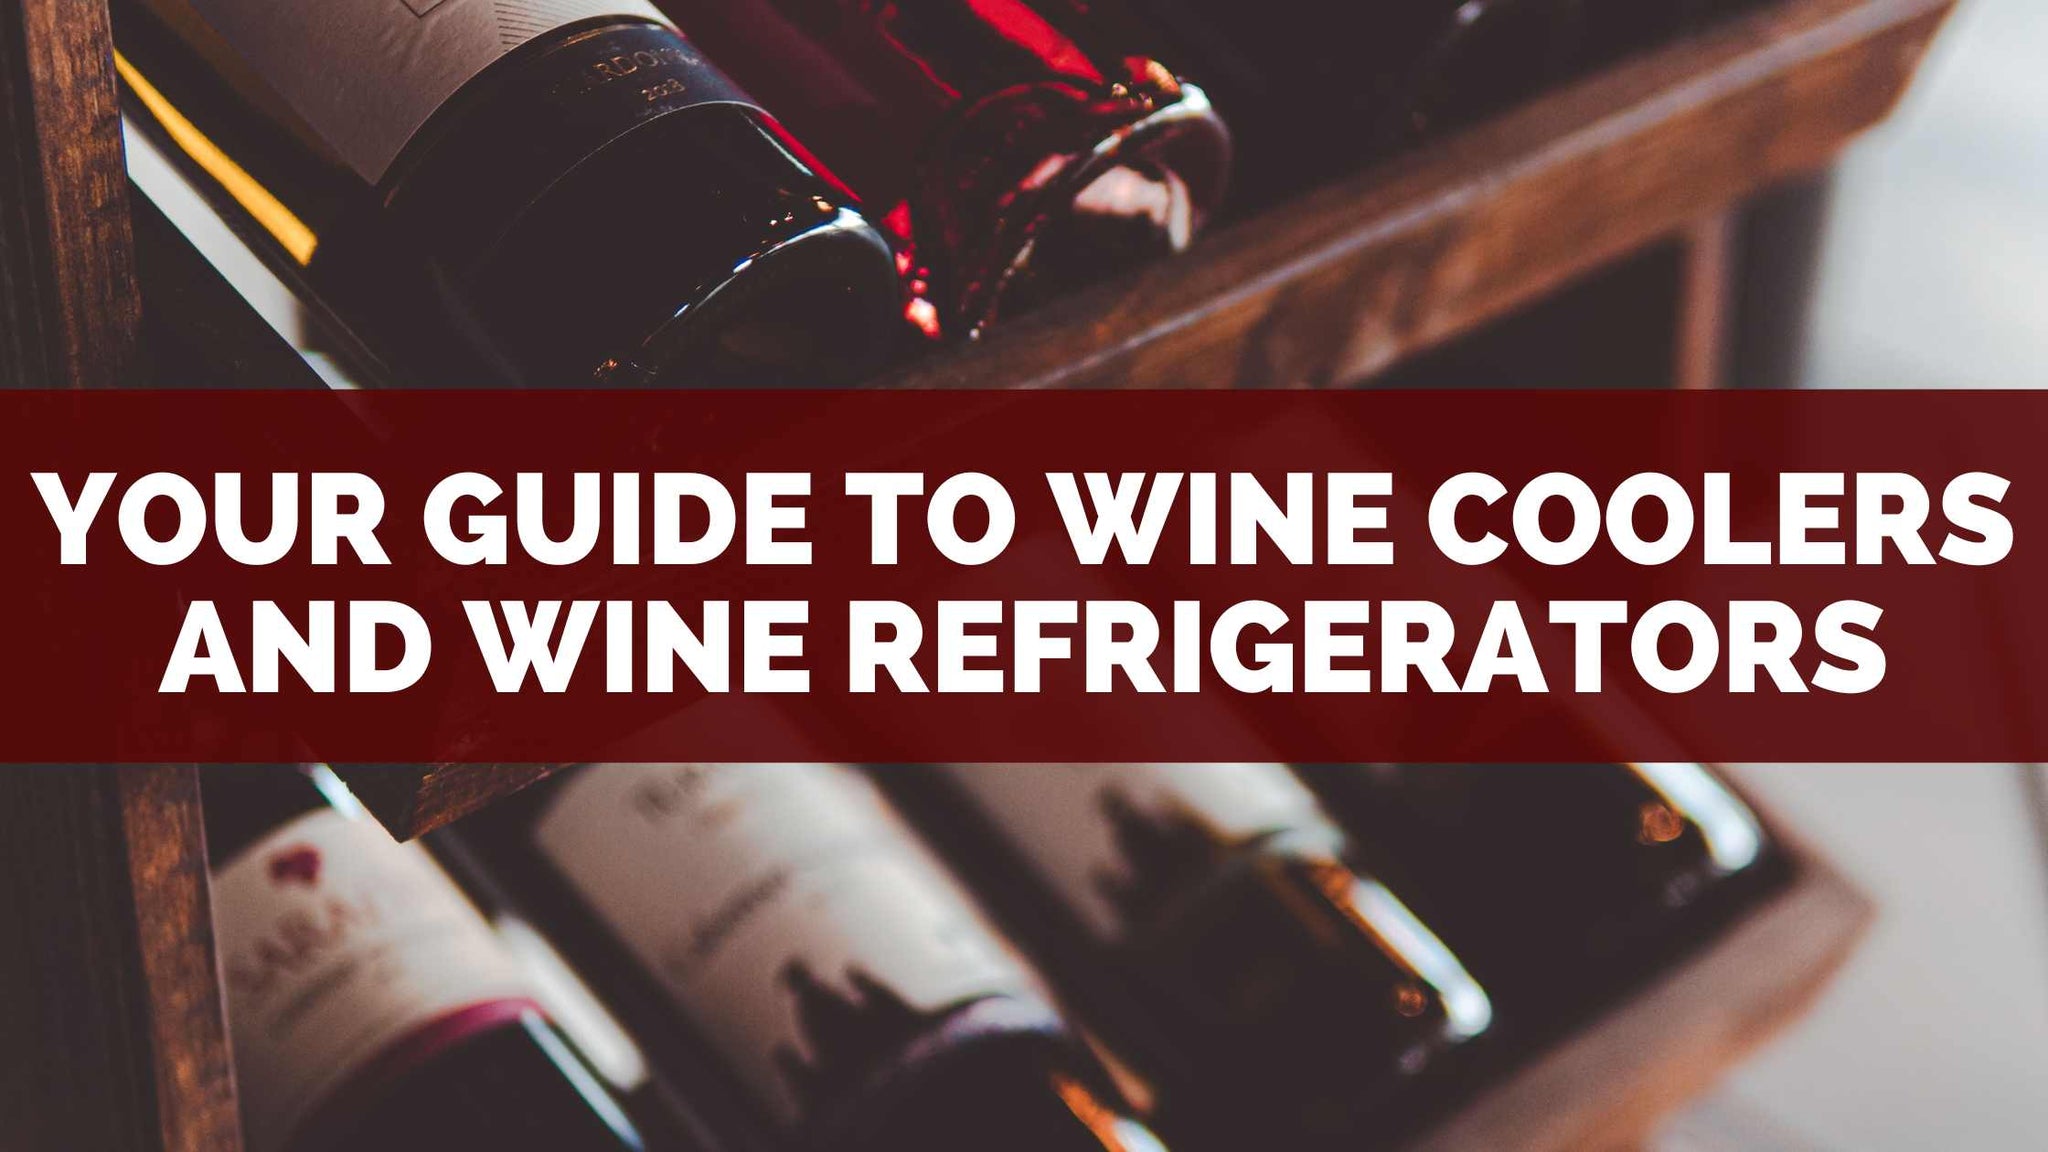 Your Guide to Wine Coolers and Wine Refrigerators